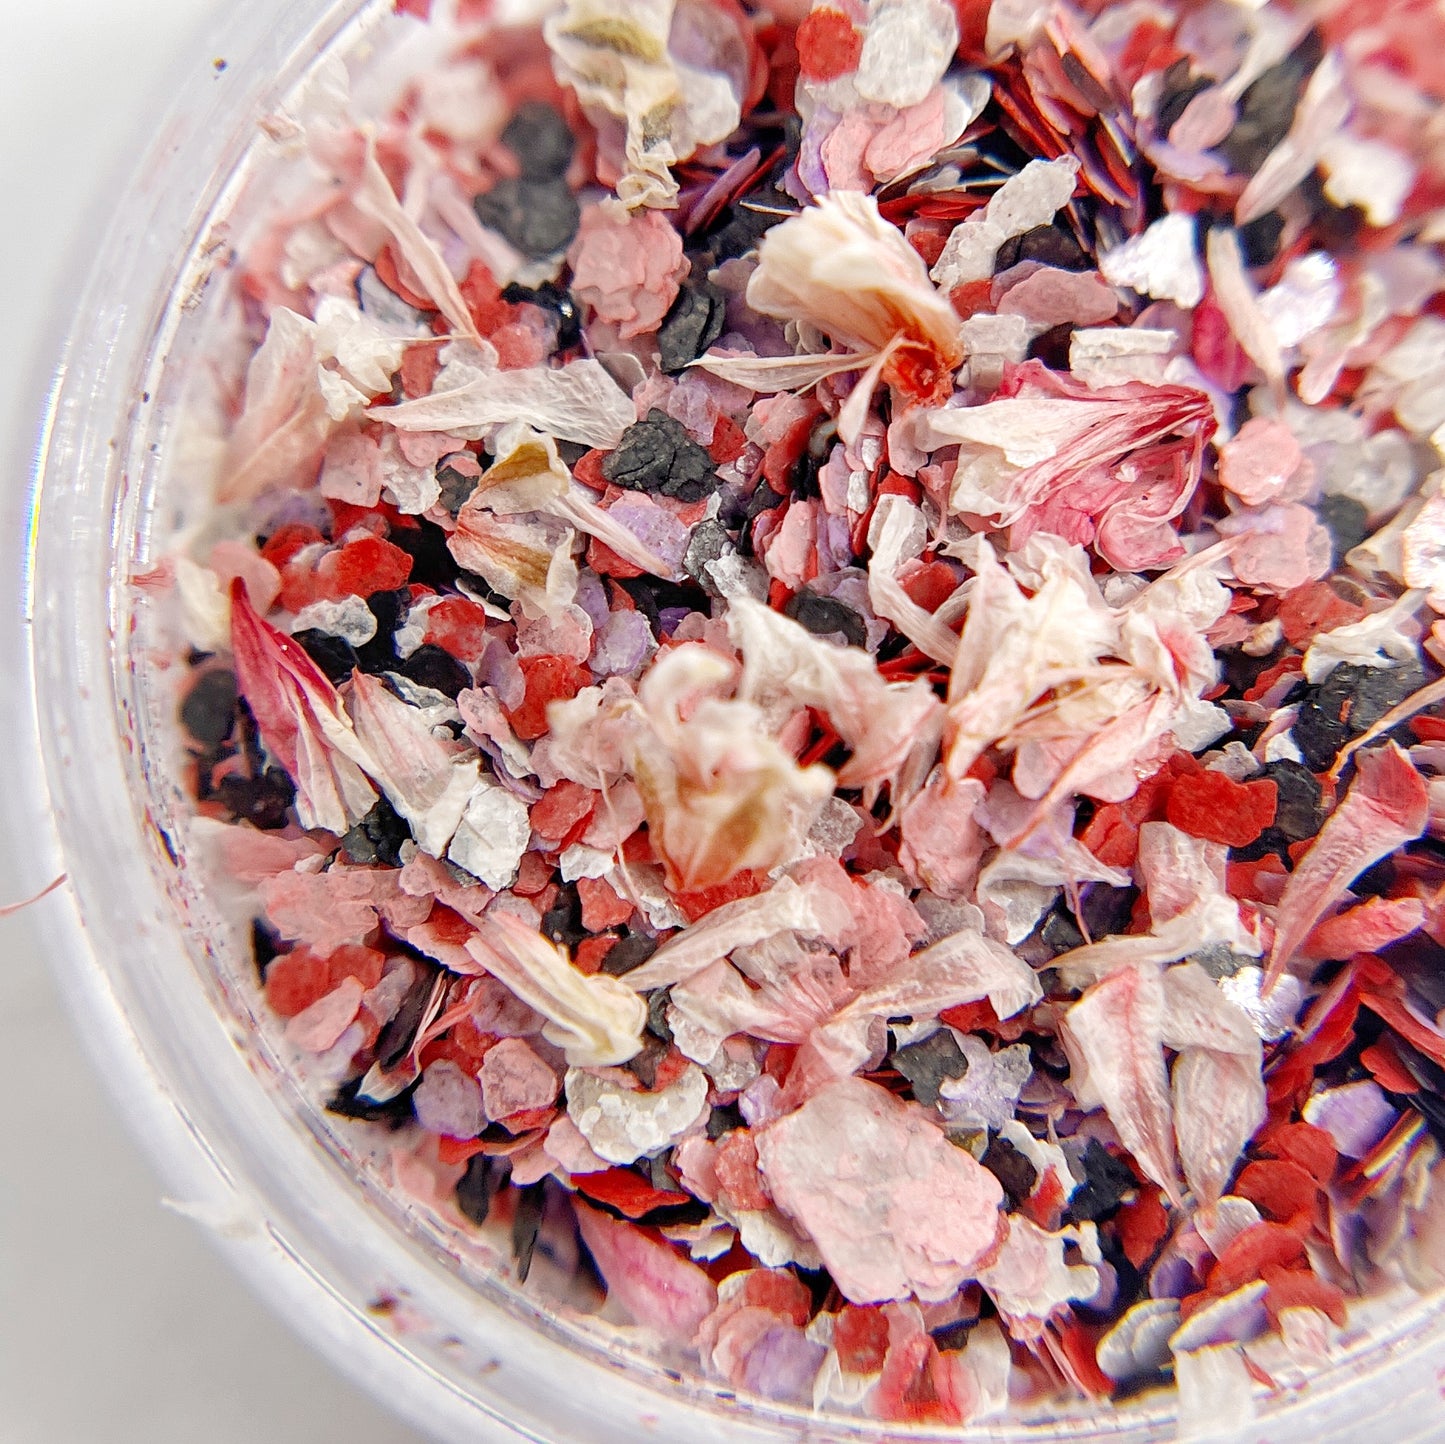 Confetti Crush Collection in Rose Crush - Colorful Mix of Mica Speckles and Dried Flower Petals in Jars, Featuring Pink, Red, Black, and White Colors, on White Background.